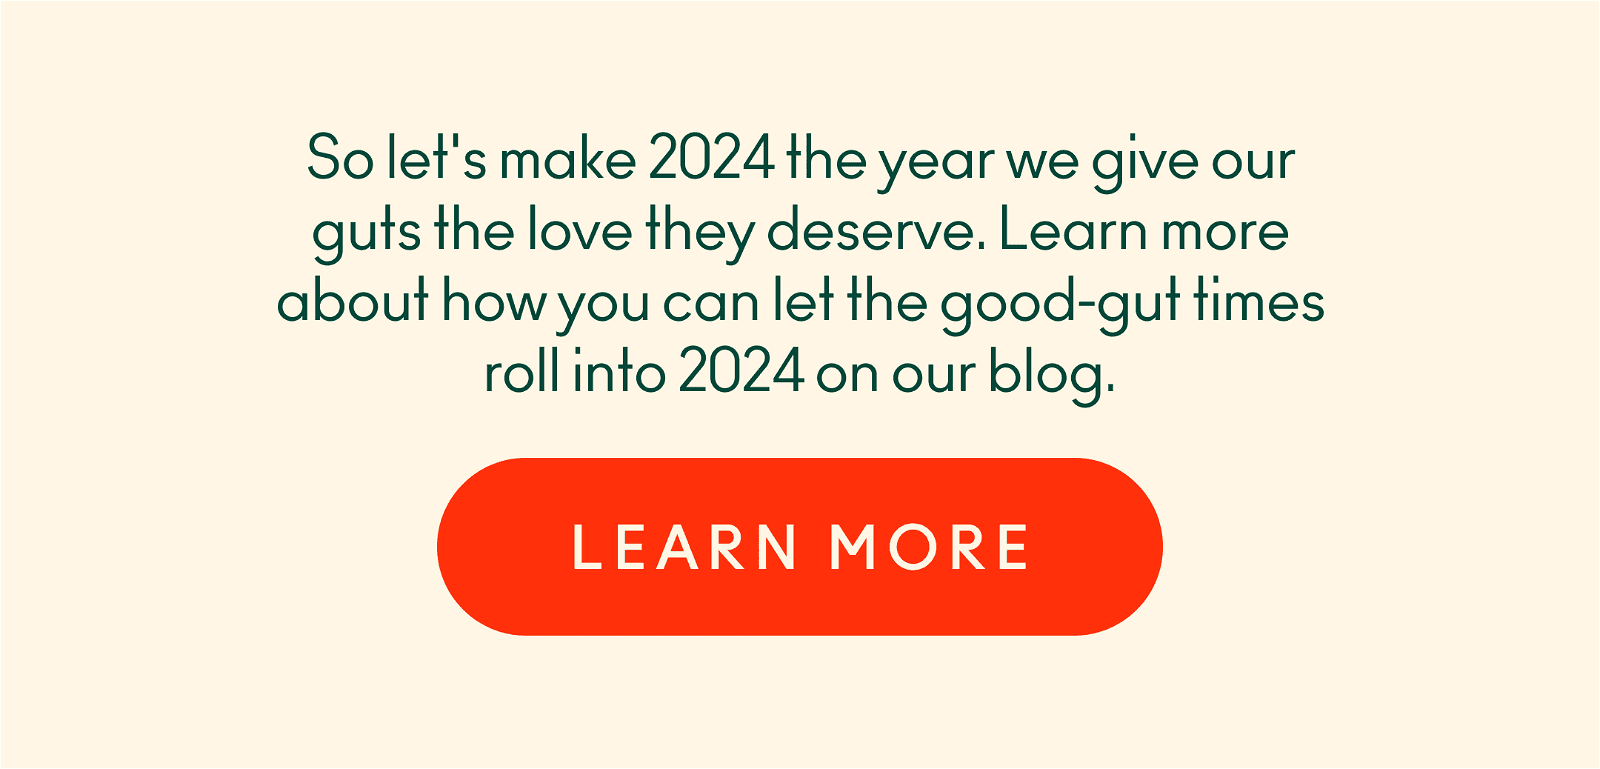 Let's make 2024 the year we give our guts the love they deserve. Learn more about how you can let the good-gut times roll into 2024 on our blog.